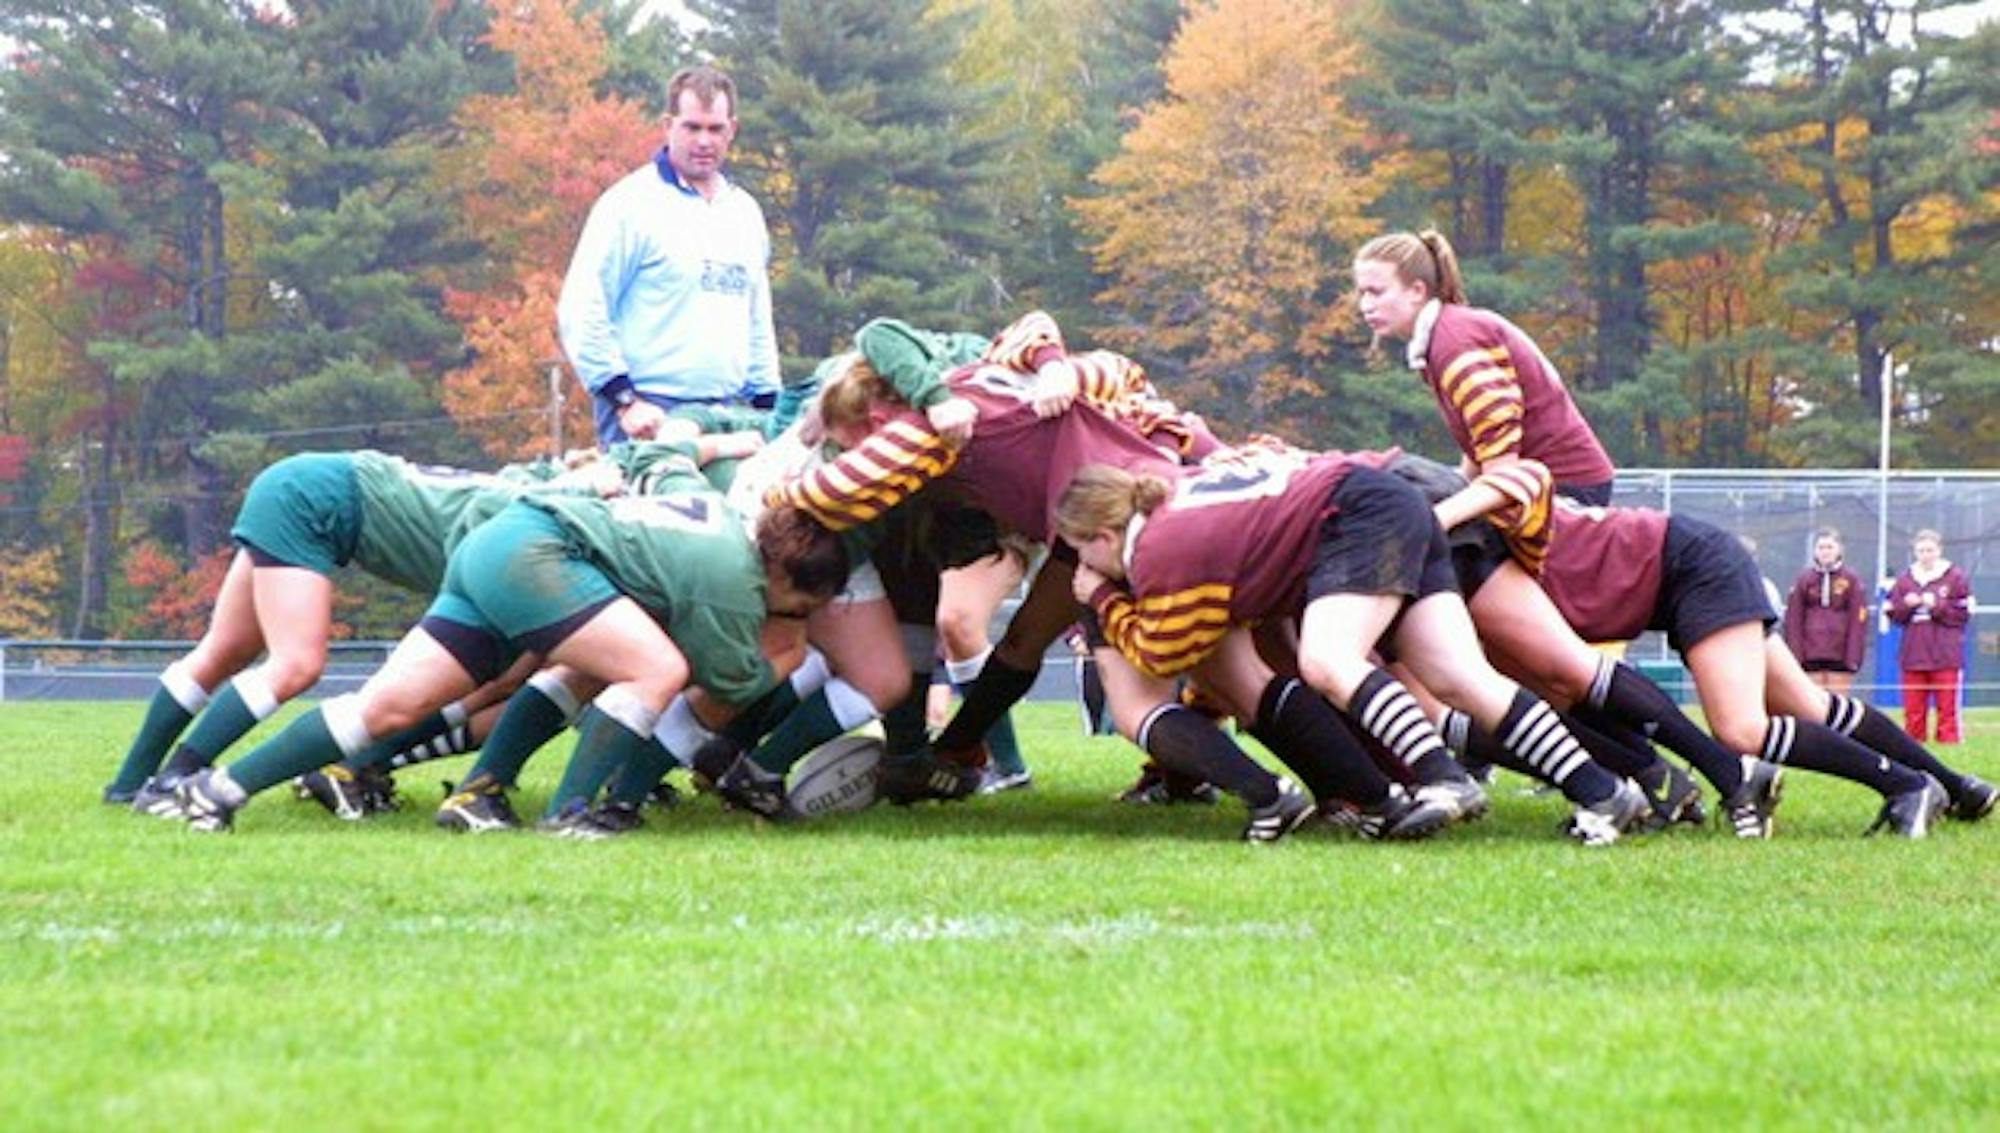 The Dartmouth women's rugby club dominated Harvard in the final game of the spring season, 66-5.